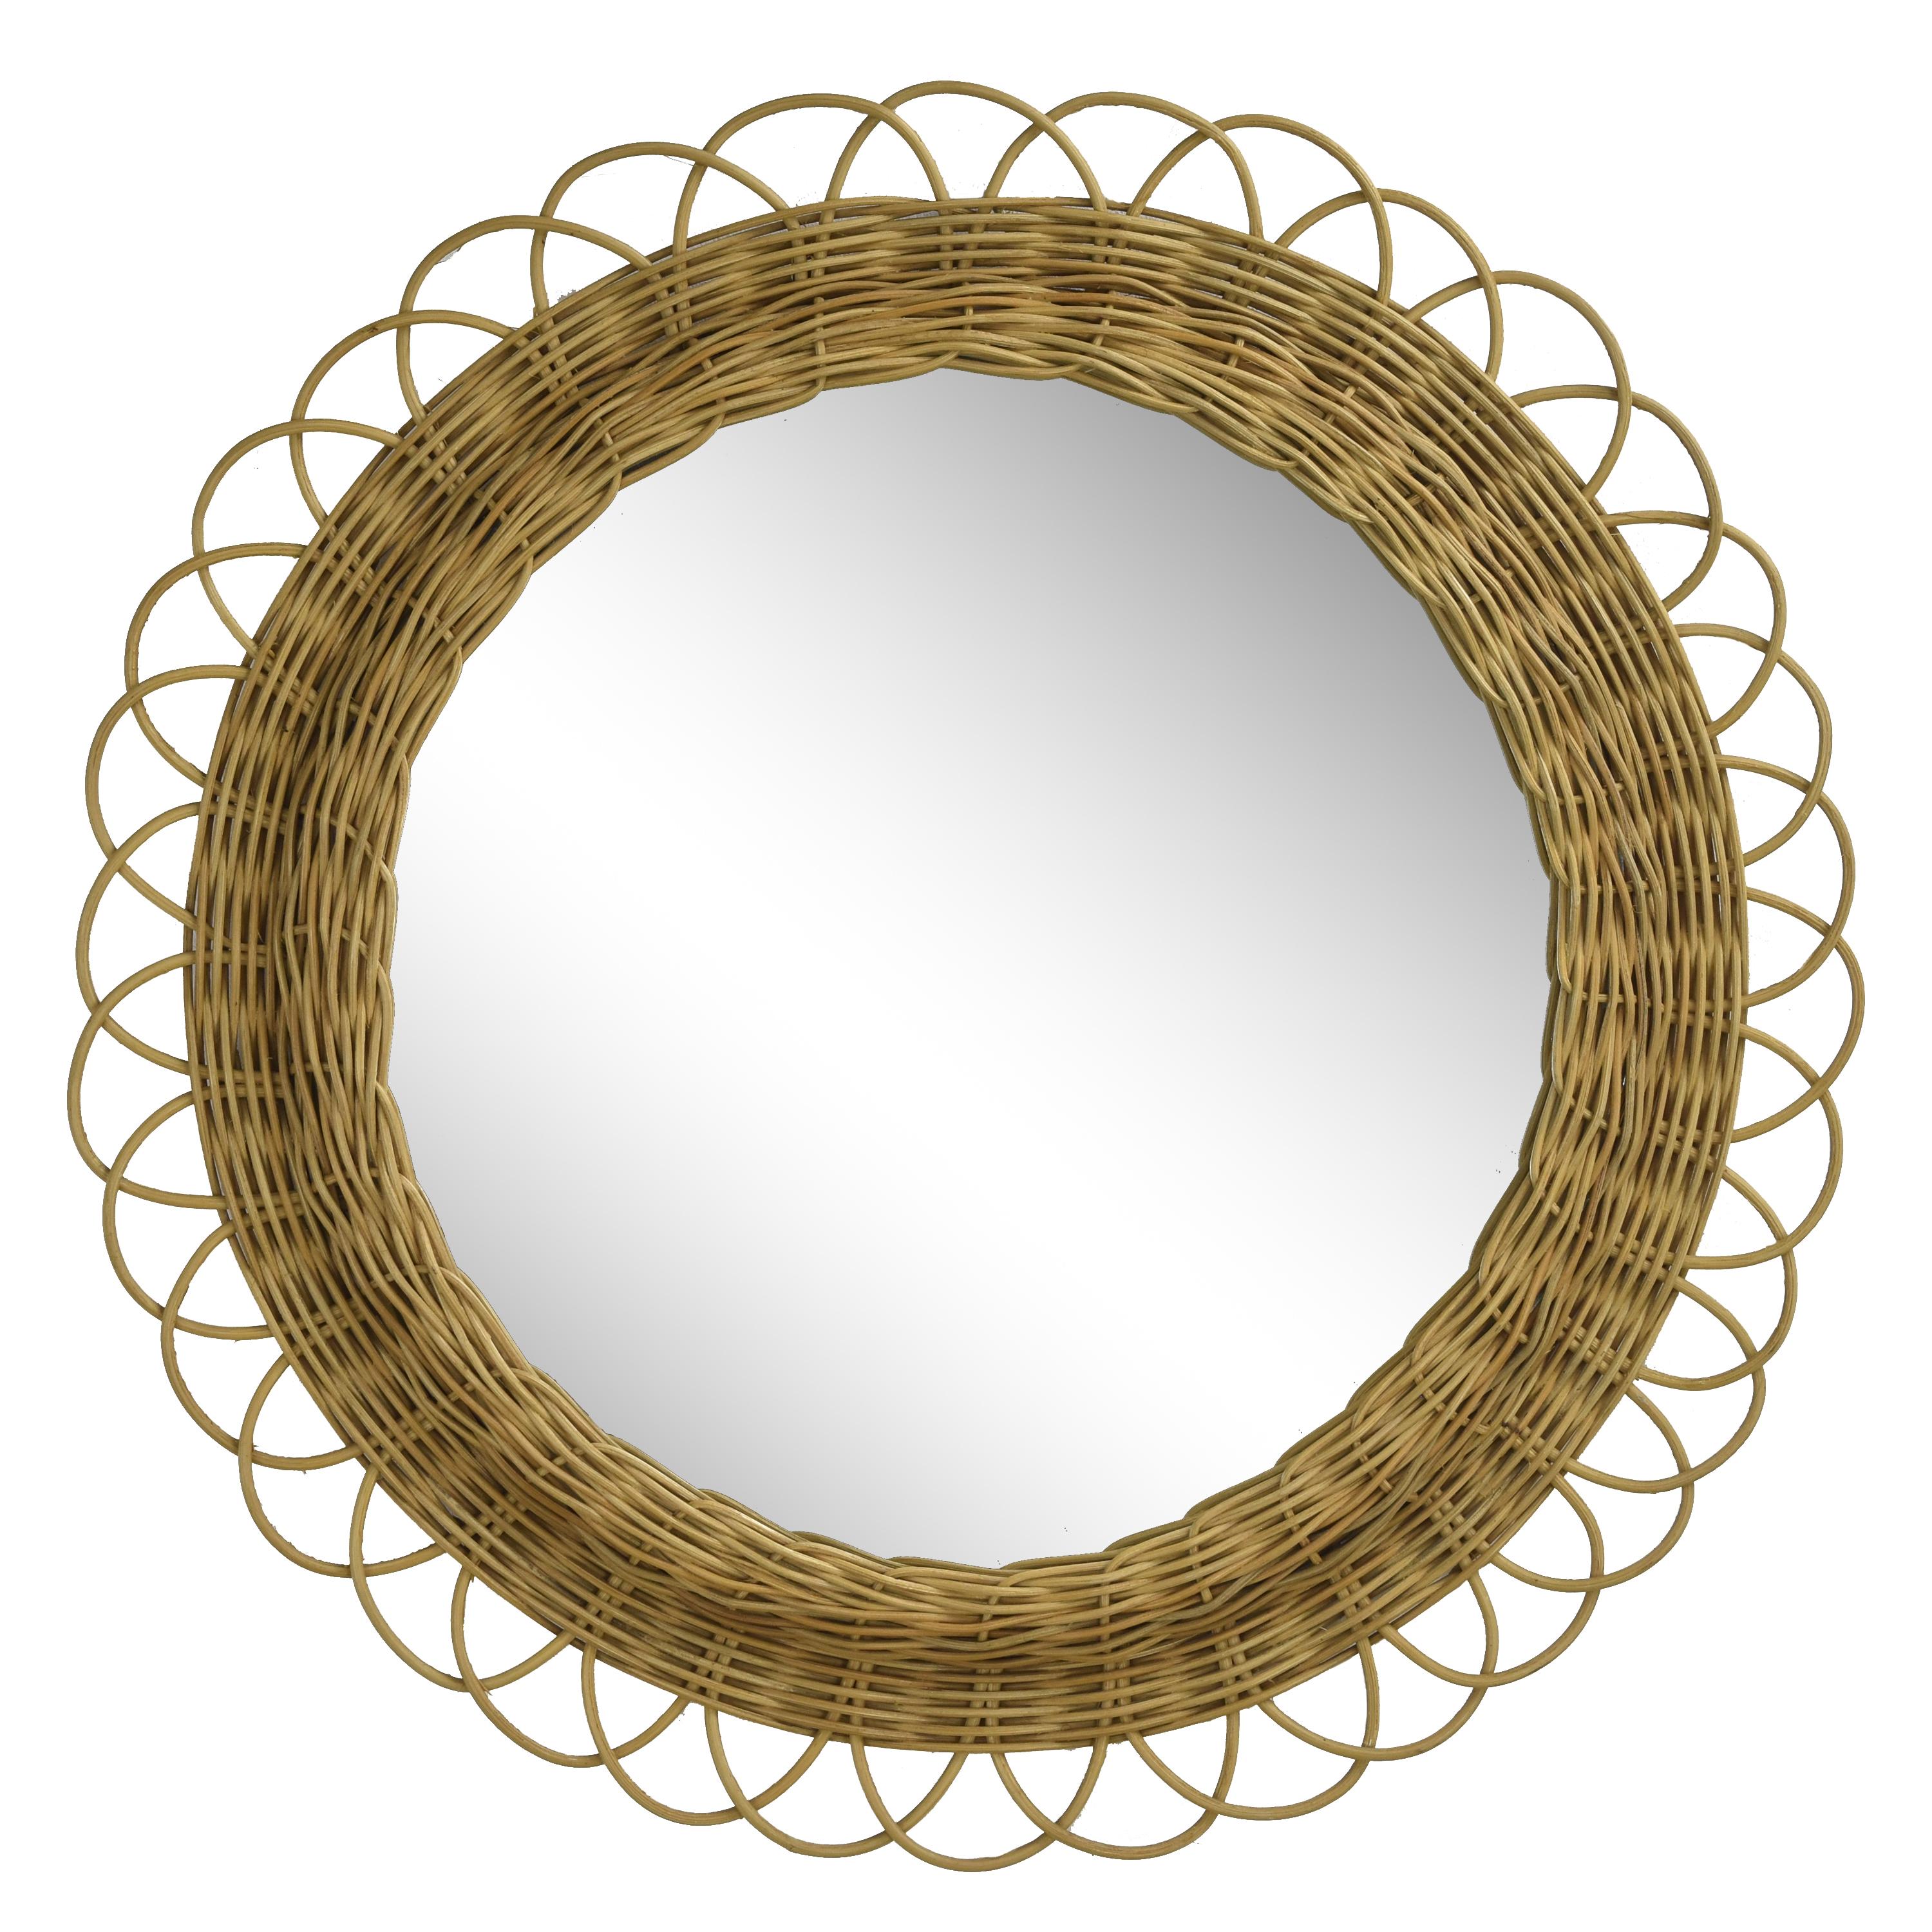 This decorative vintage wall mirror features a braided frame made of rattan, likely produced in France or Italy during the 1960s. The unique woven design adds a touch of rustic charm to the piece, making it a standout addition to any room.